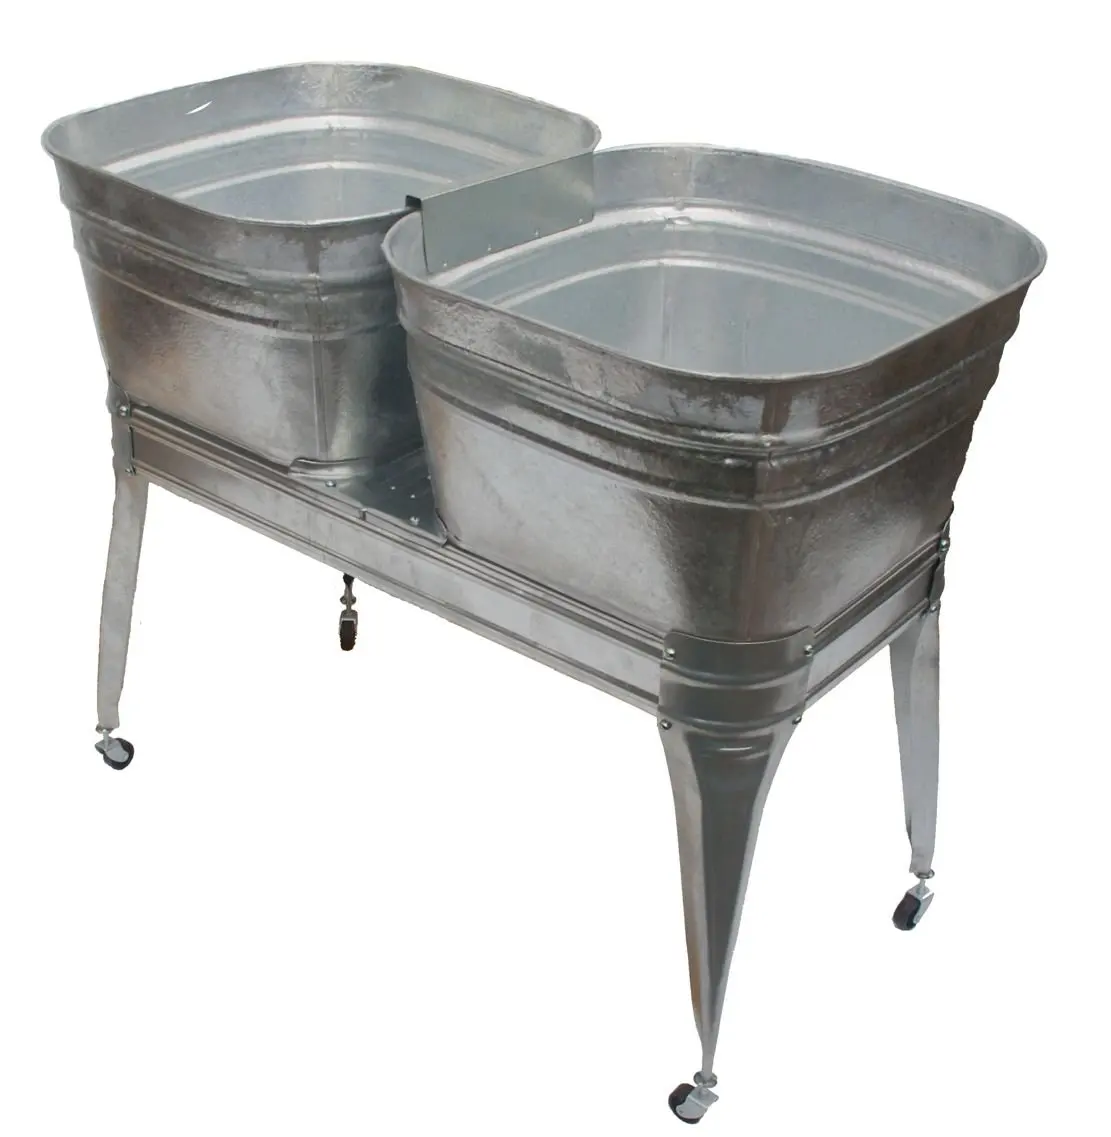 Buy Square Wash Tub With Standard 1 1 2 Tailpiece Kitchen